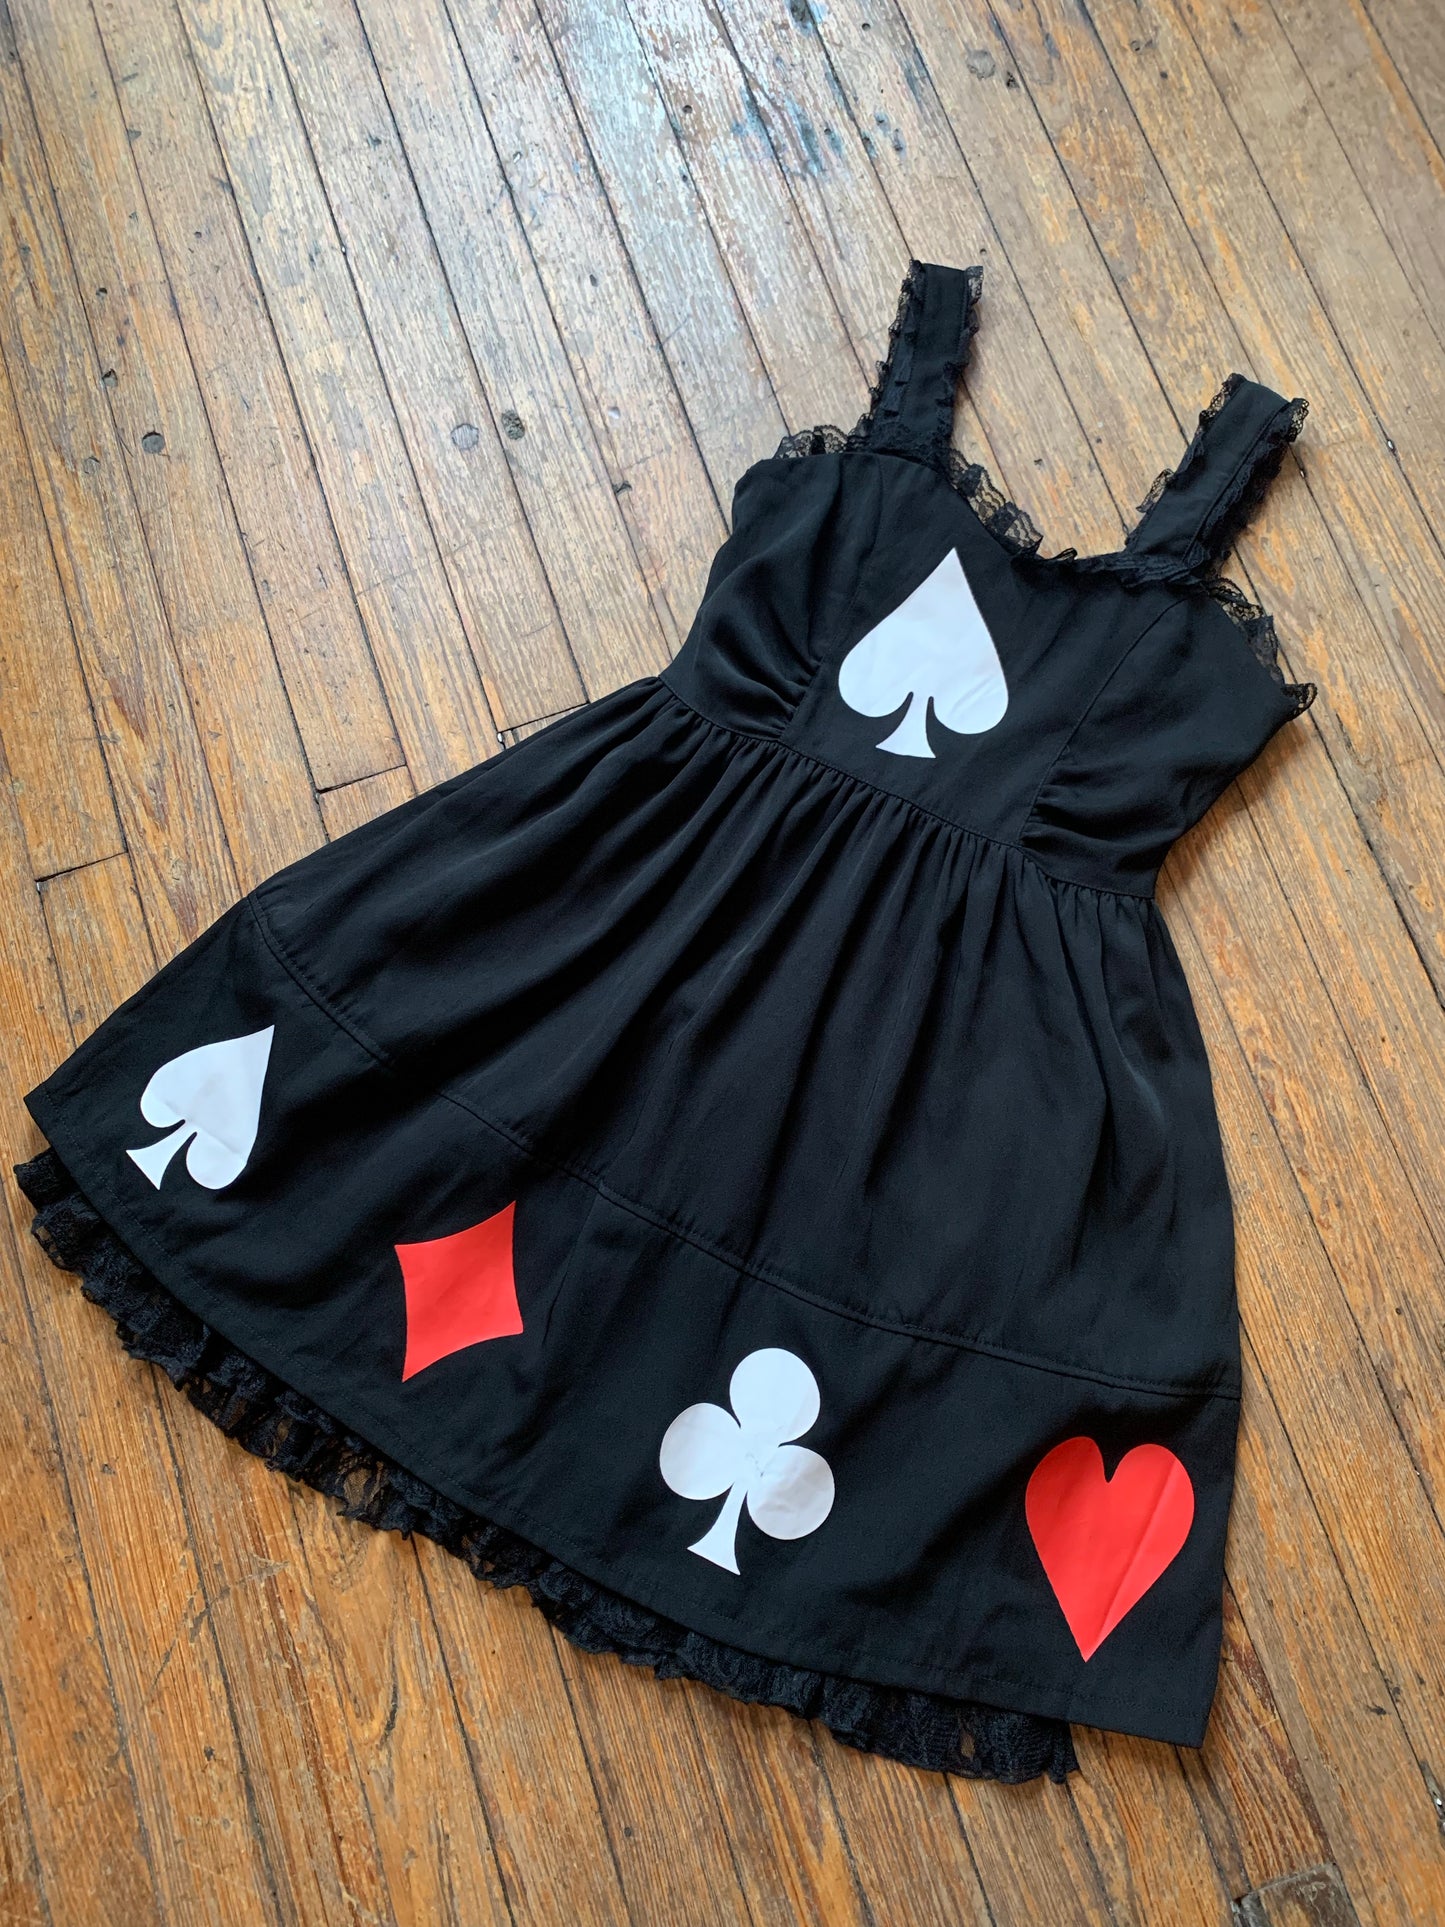 Black Playing Card Suit Frilly Dress